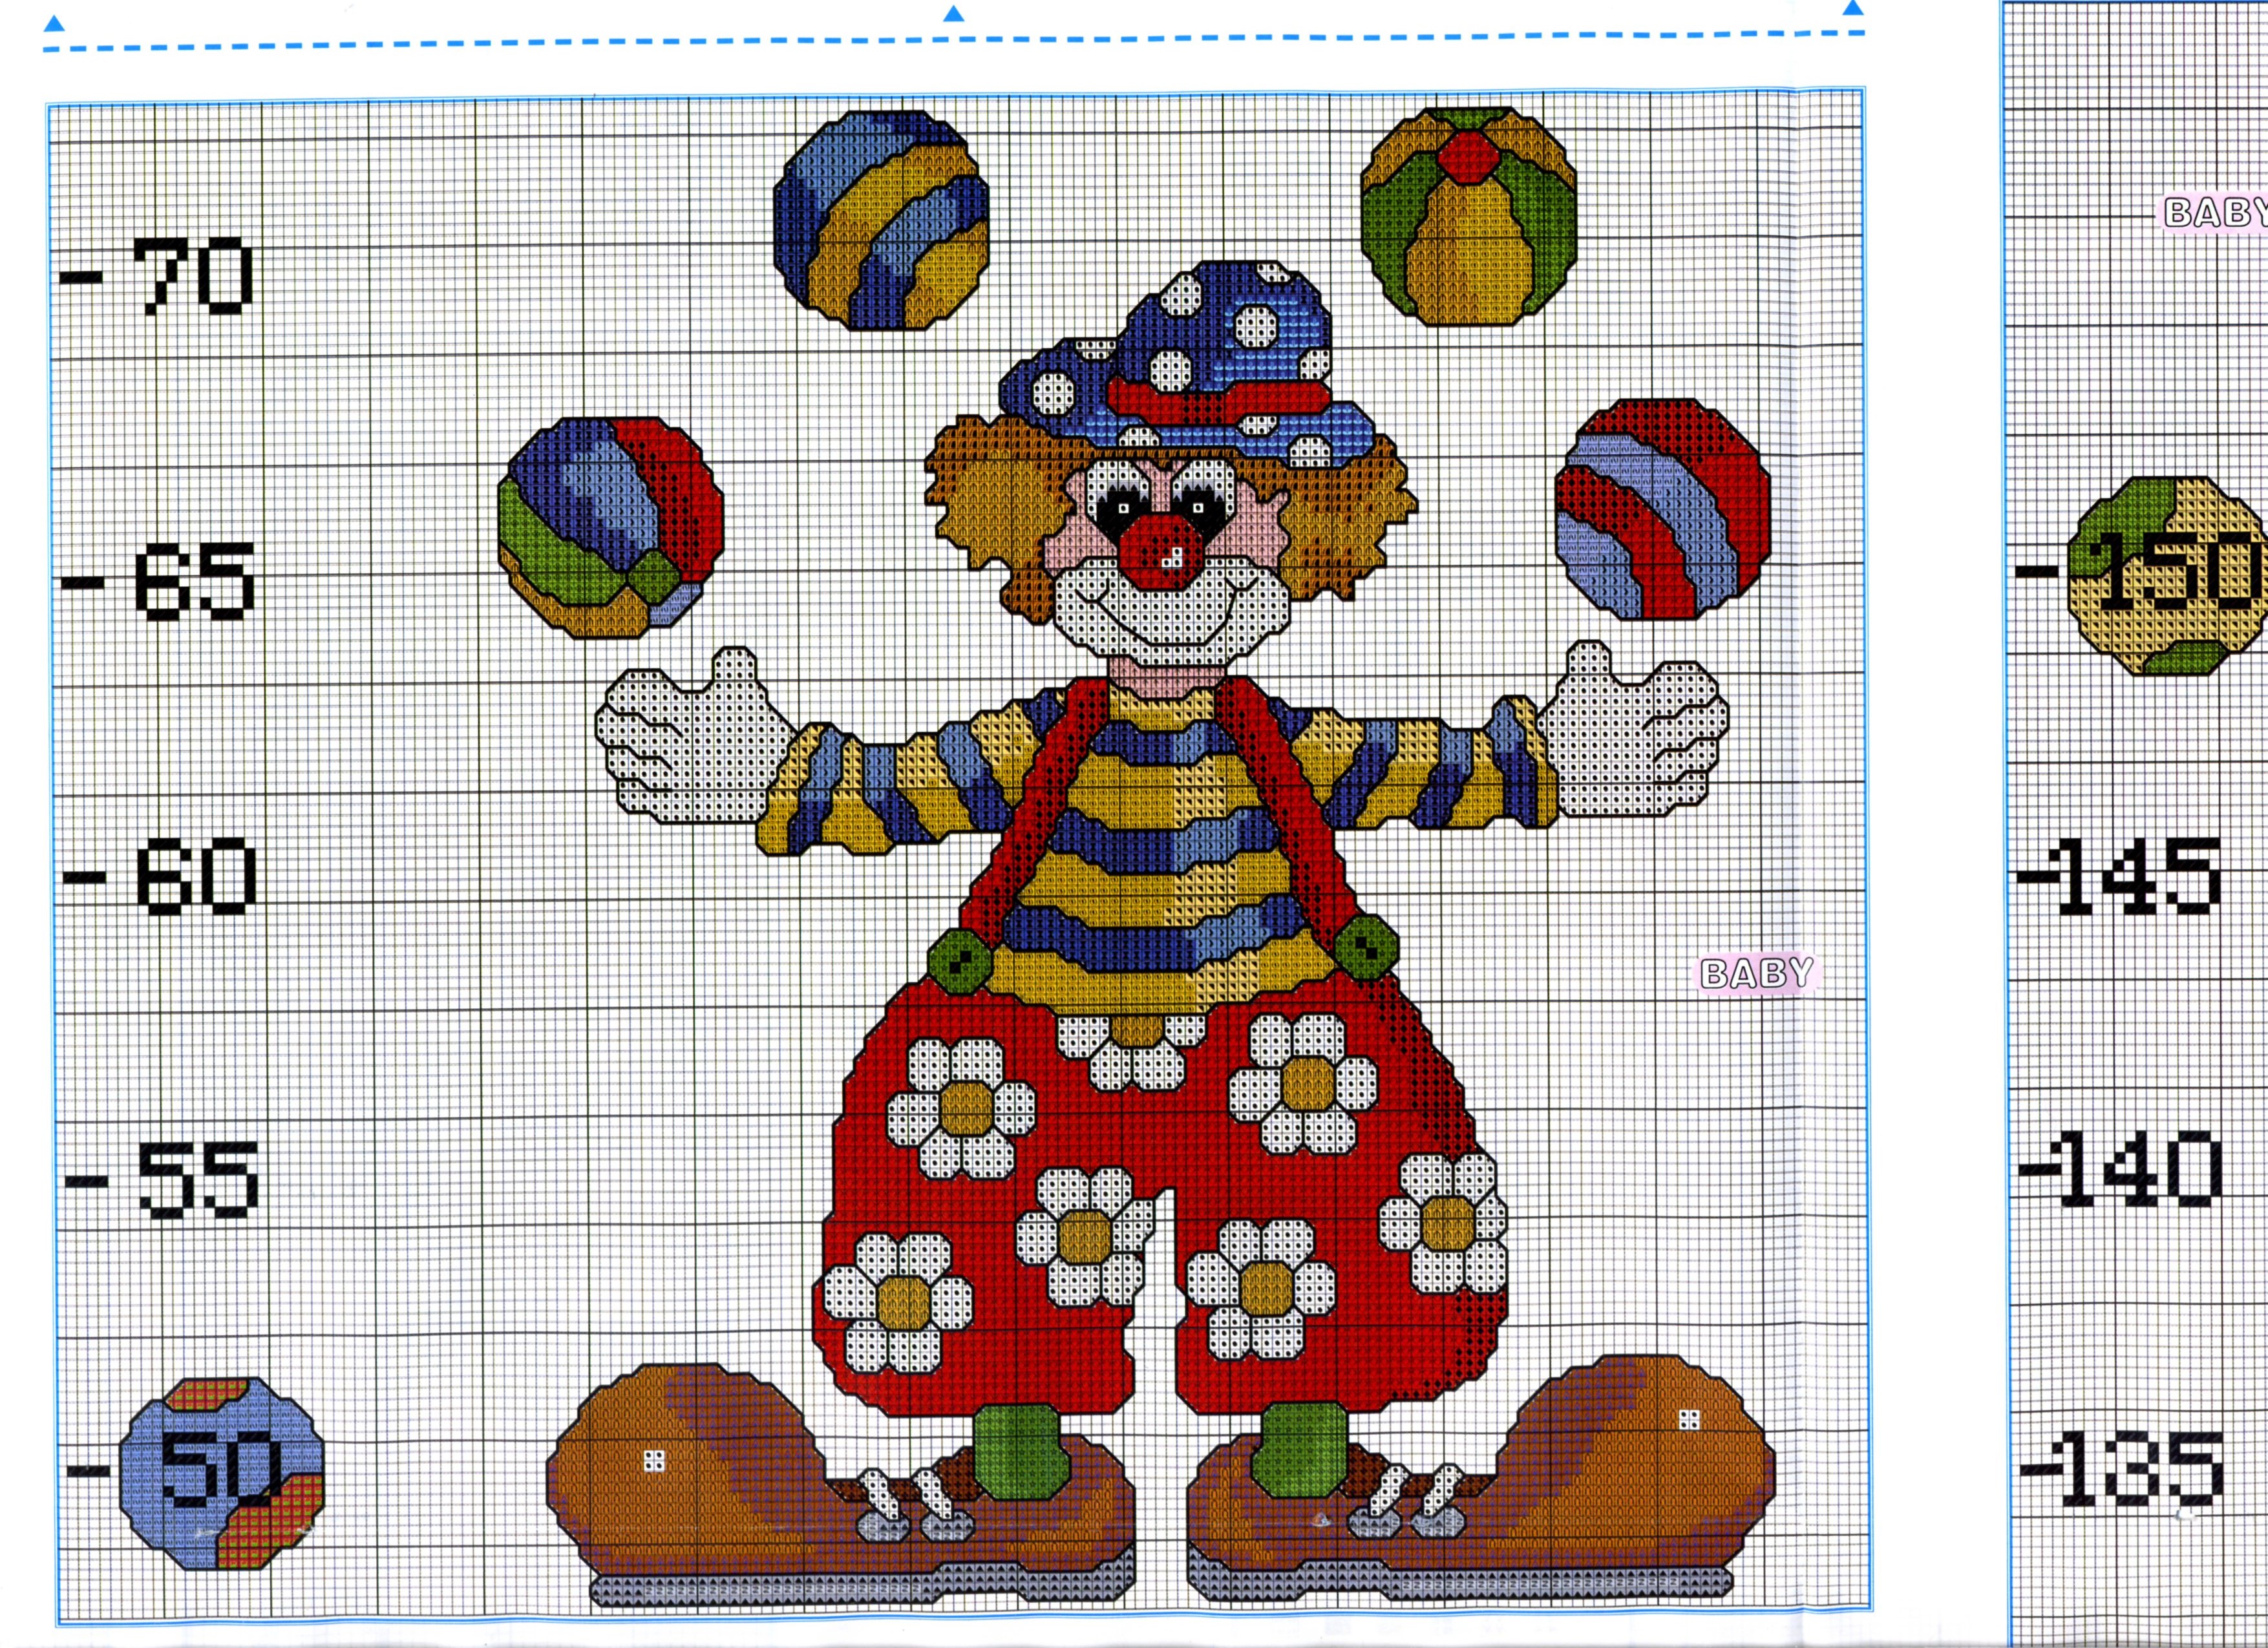 Height chart with clowns (2)